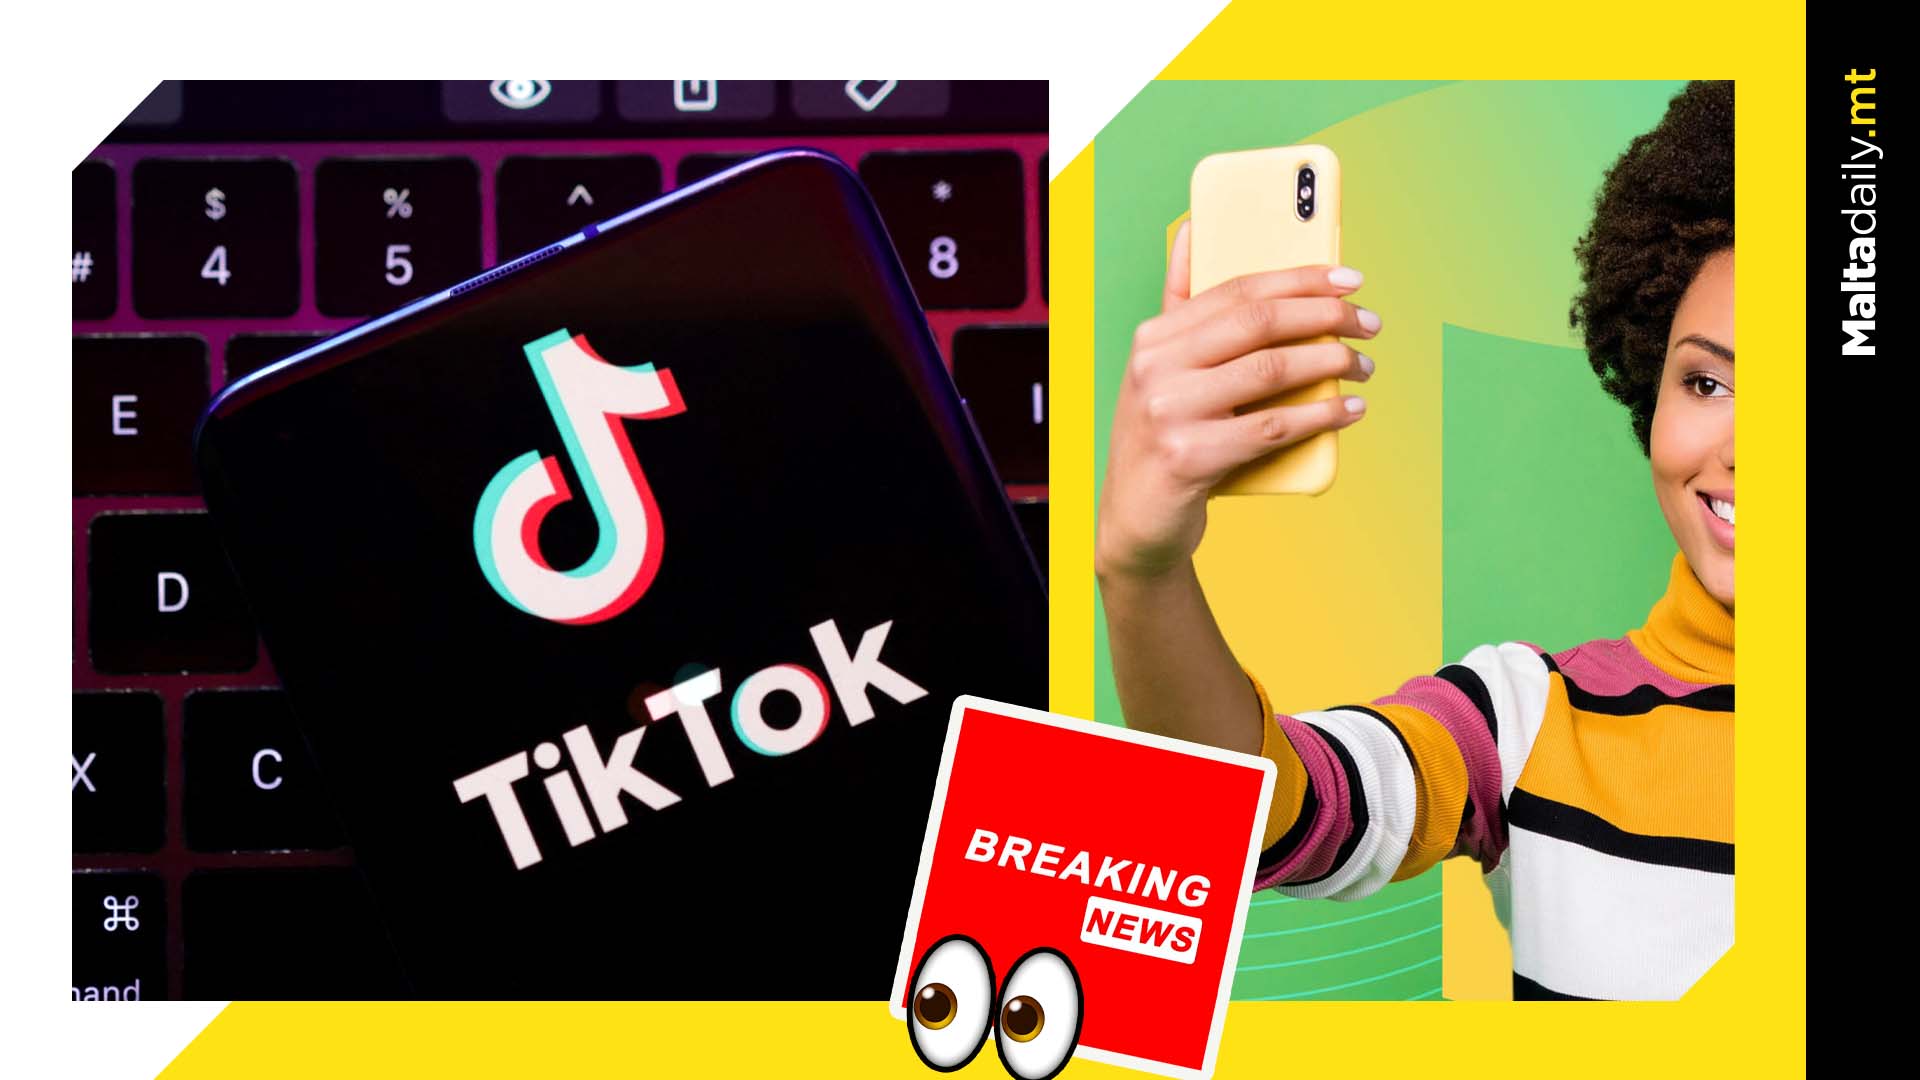 TikTok And Instagram Users Prefer Getting News From Influencers